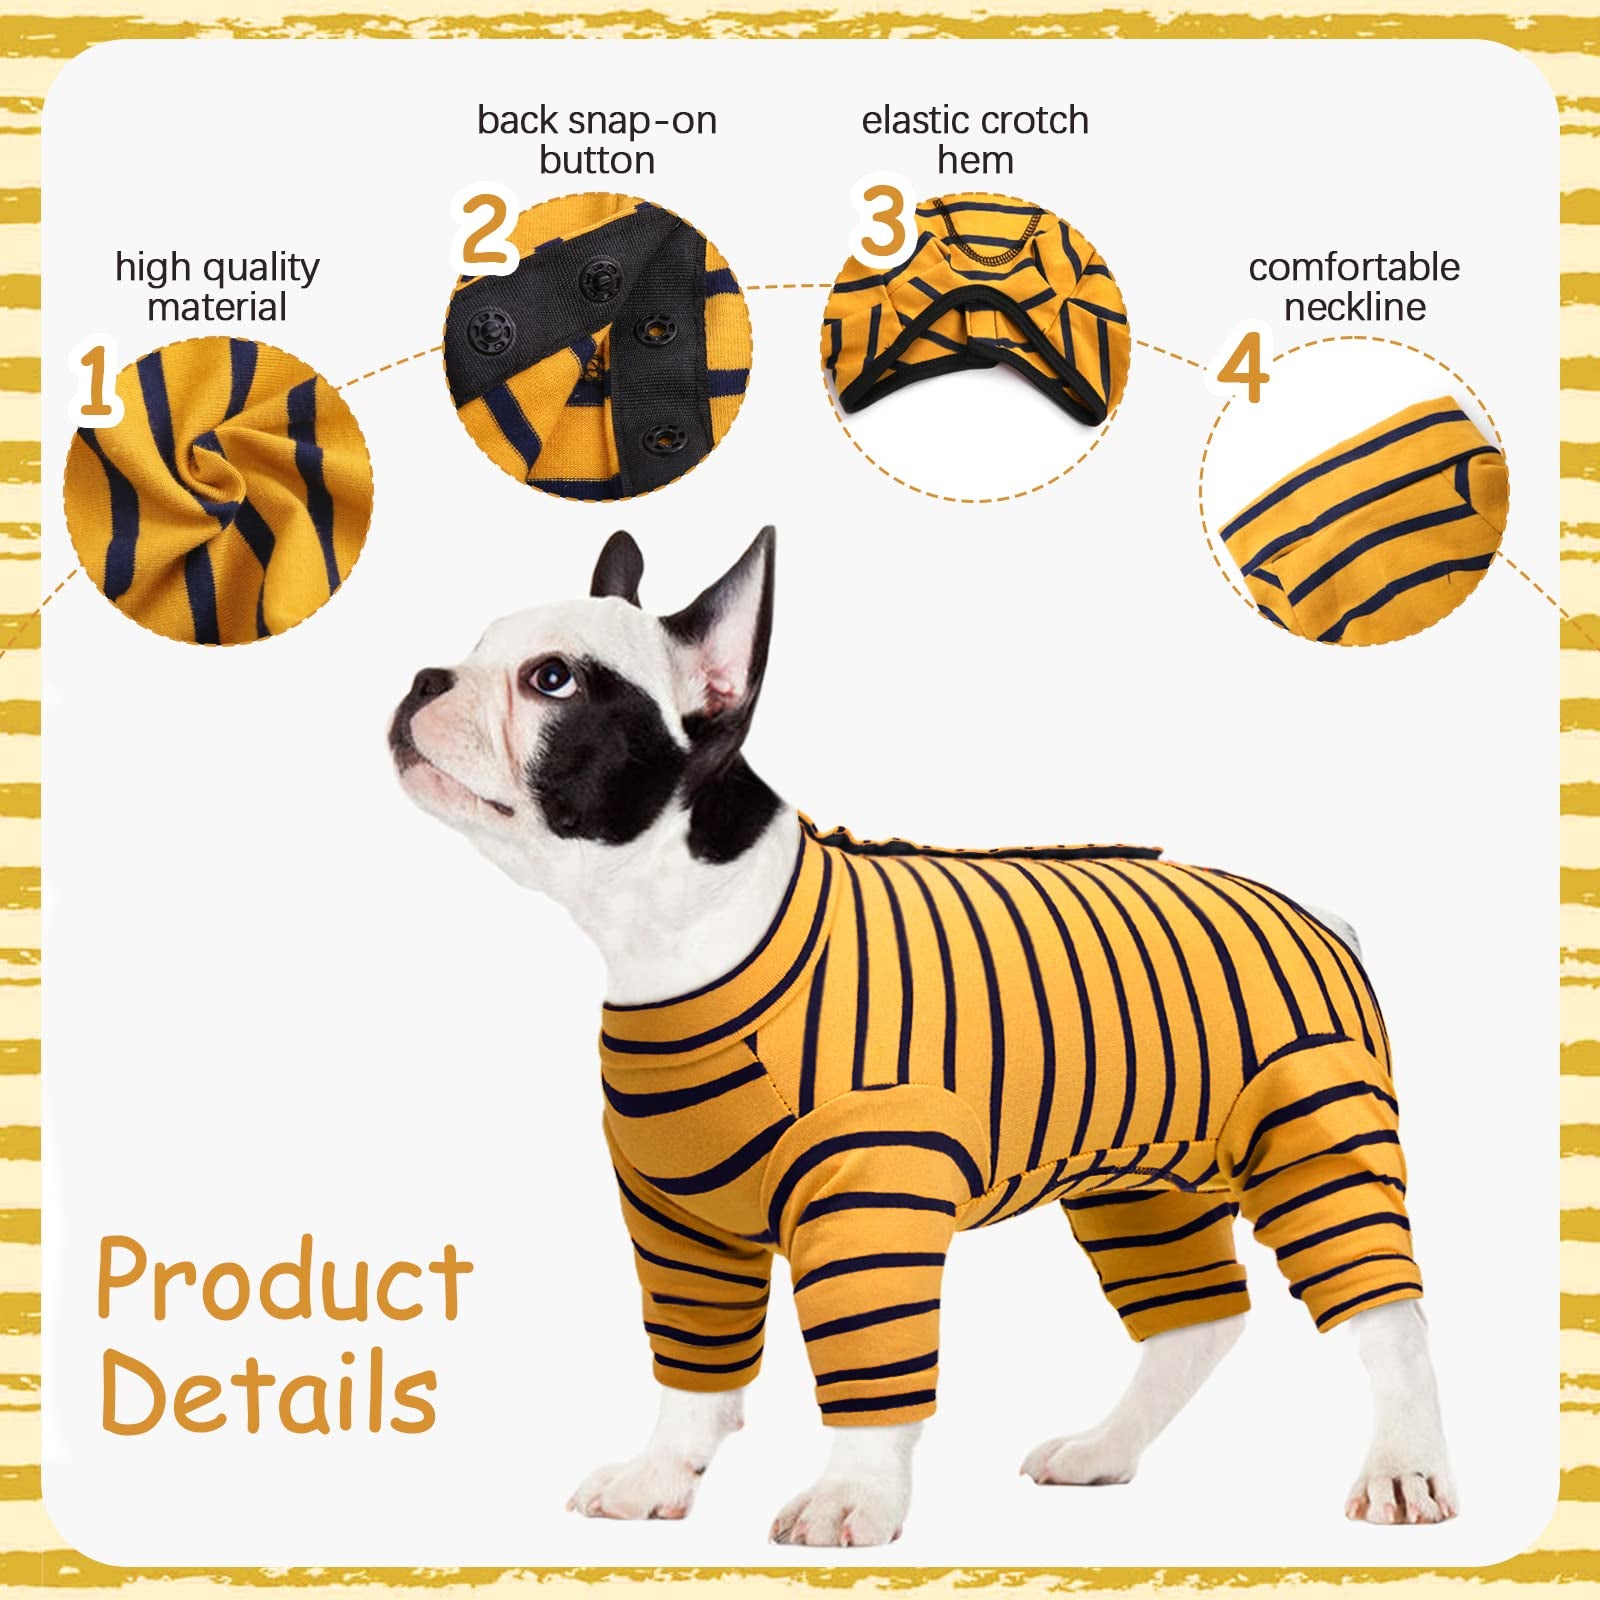 ROZKITCH Dog Onesie Recovery Suit, Puppy after Surgery Long Sleeve Shirt for Shedding Skin Disease Wound Protection, Pet Pajamas Anti-Licking Cone Alternative for Small Medium Cats Dogs